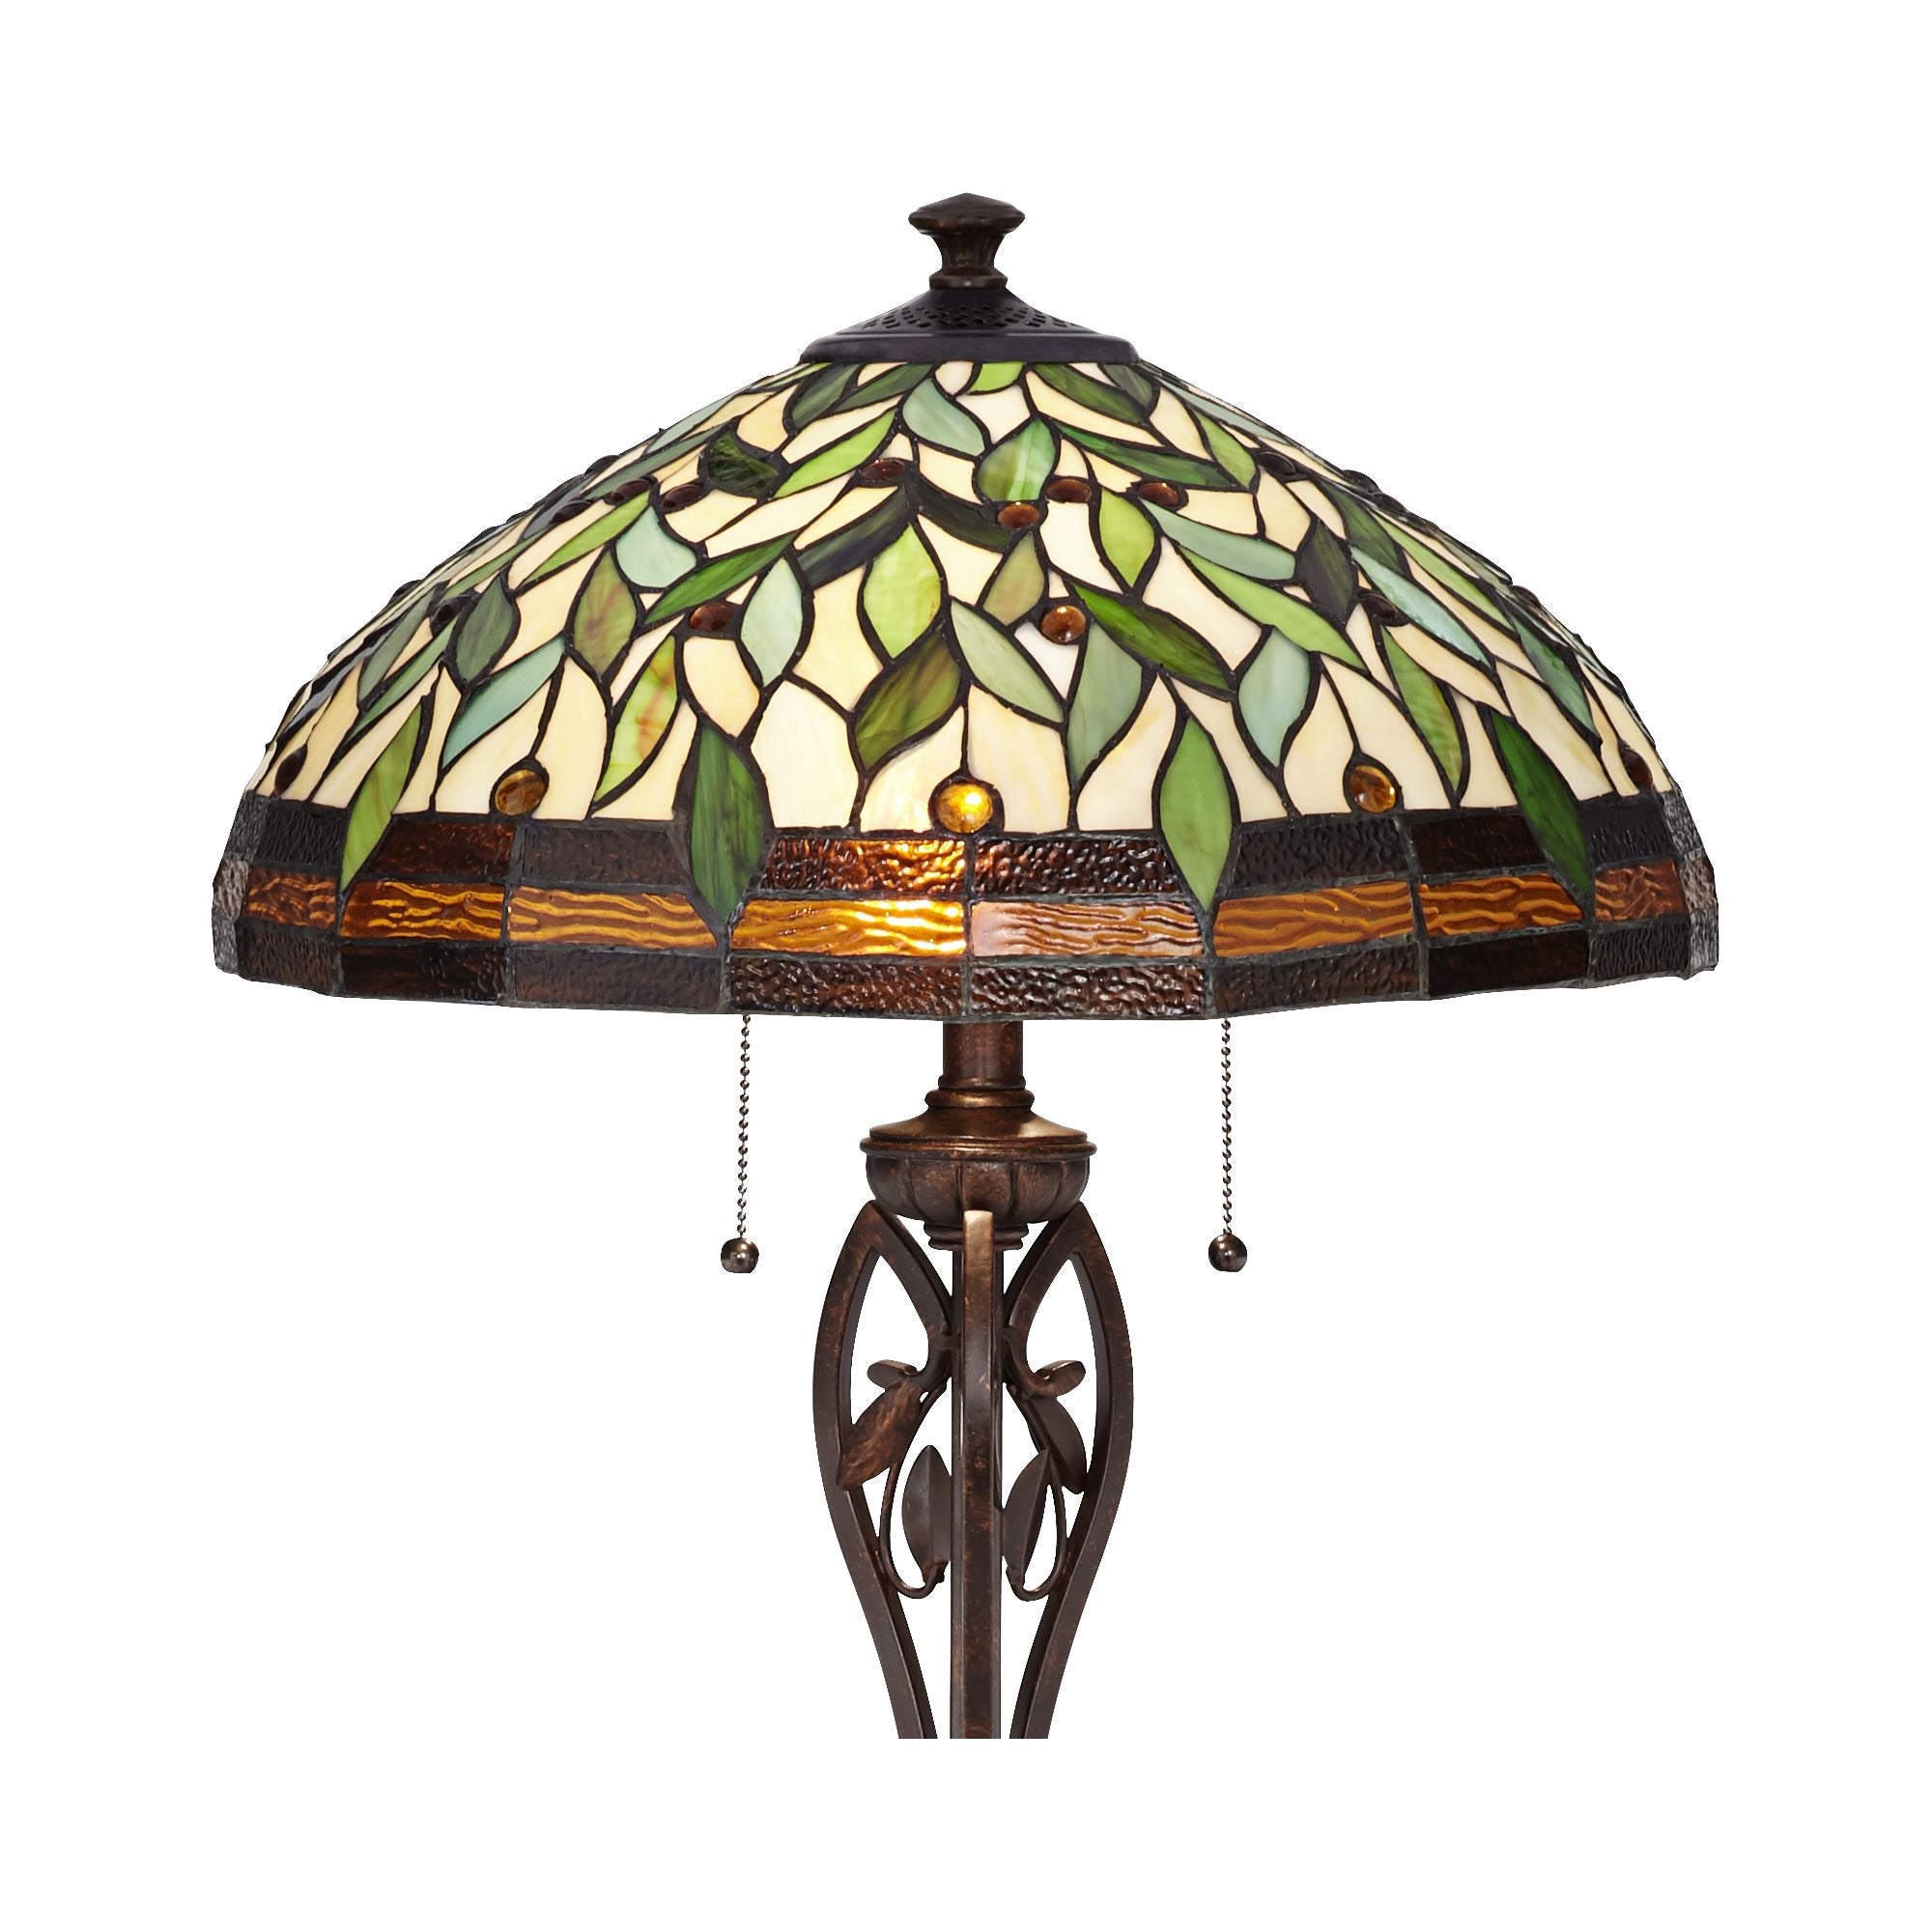 Robert Louis  Traditional Floor Lamp 60" Tall Bronze  Style Leaf Pattern Stained Glass Shade for Living Room Reading Bedroom